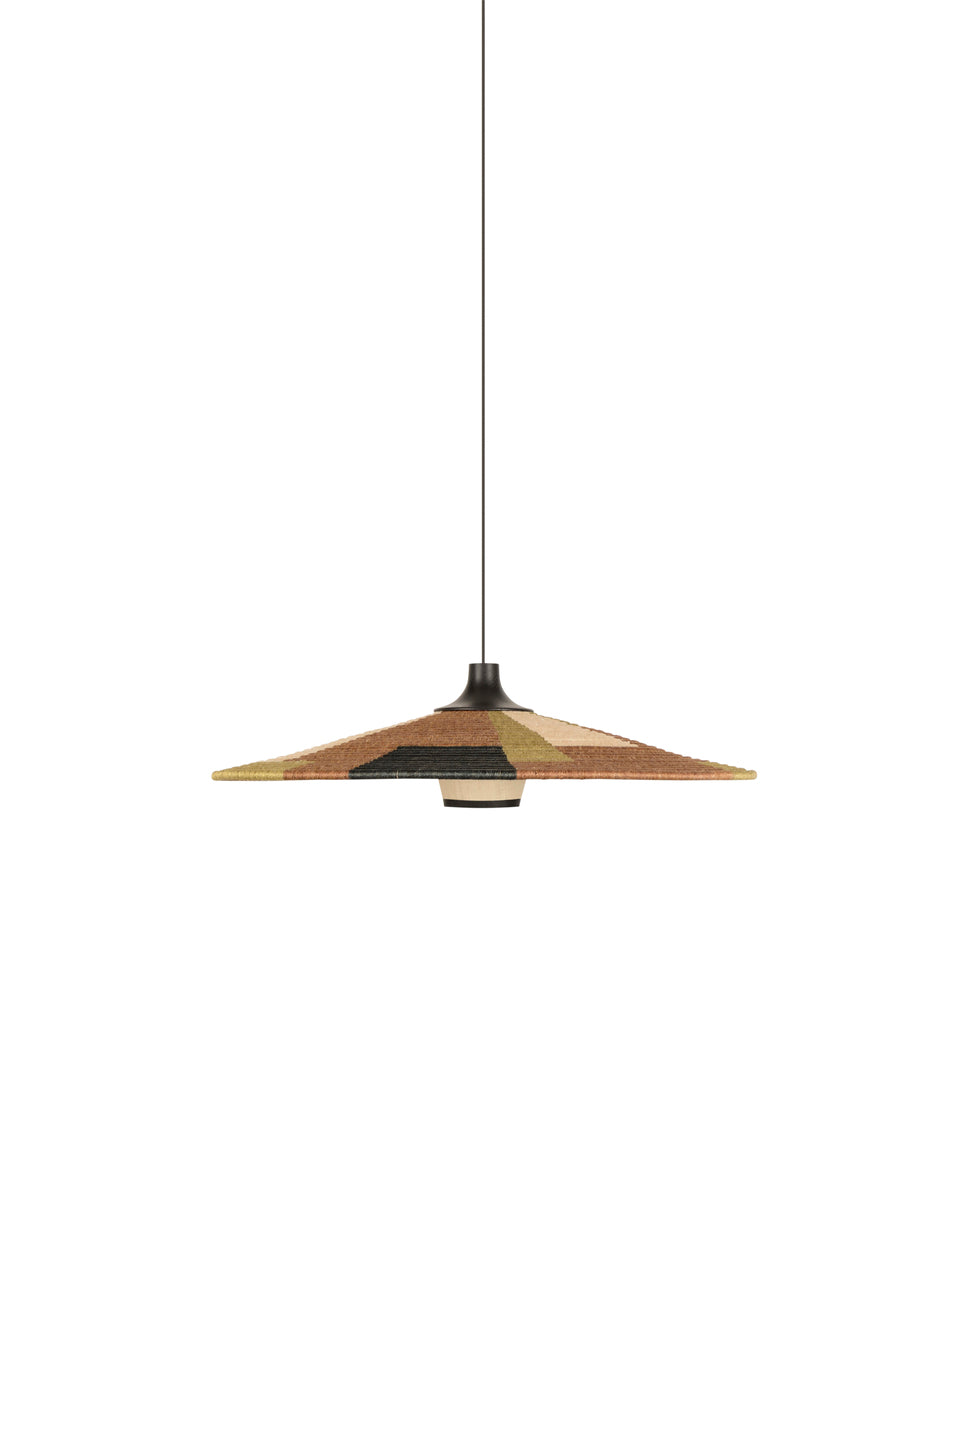 Parrot Large Pendant Light by Forestier